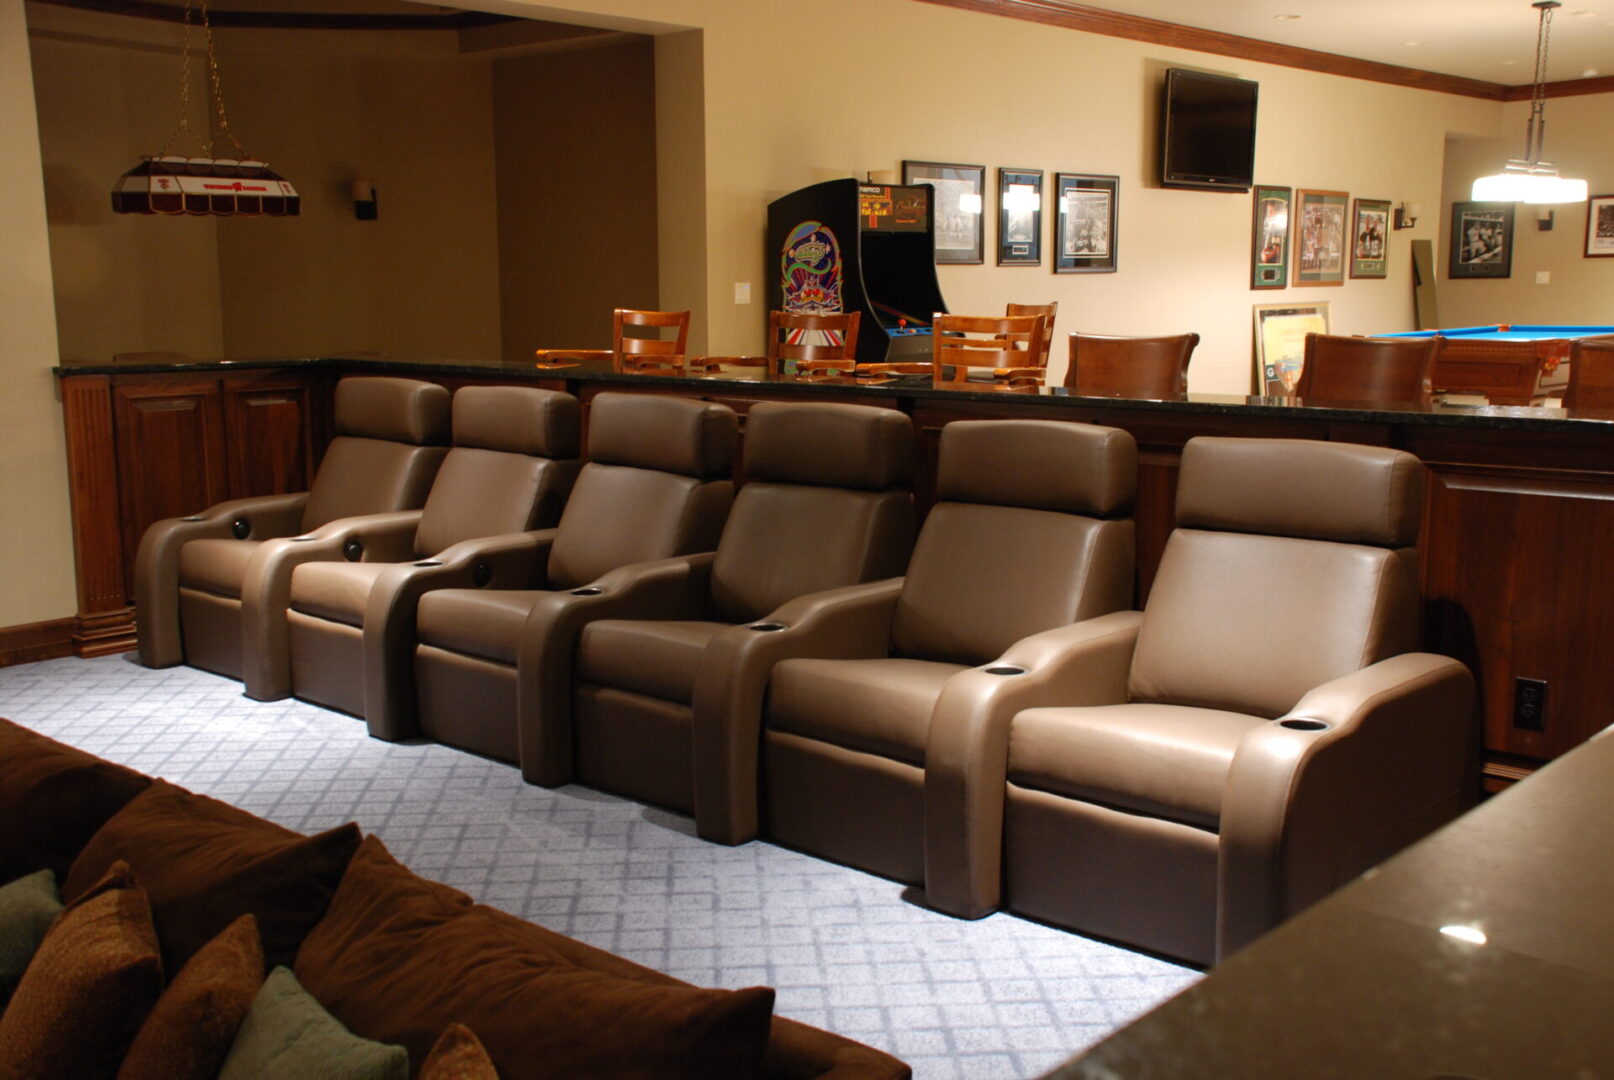 Comfy 6-person seat in a home theater